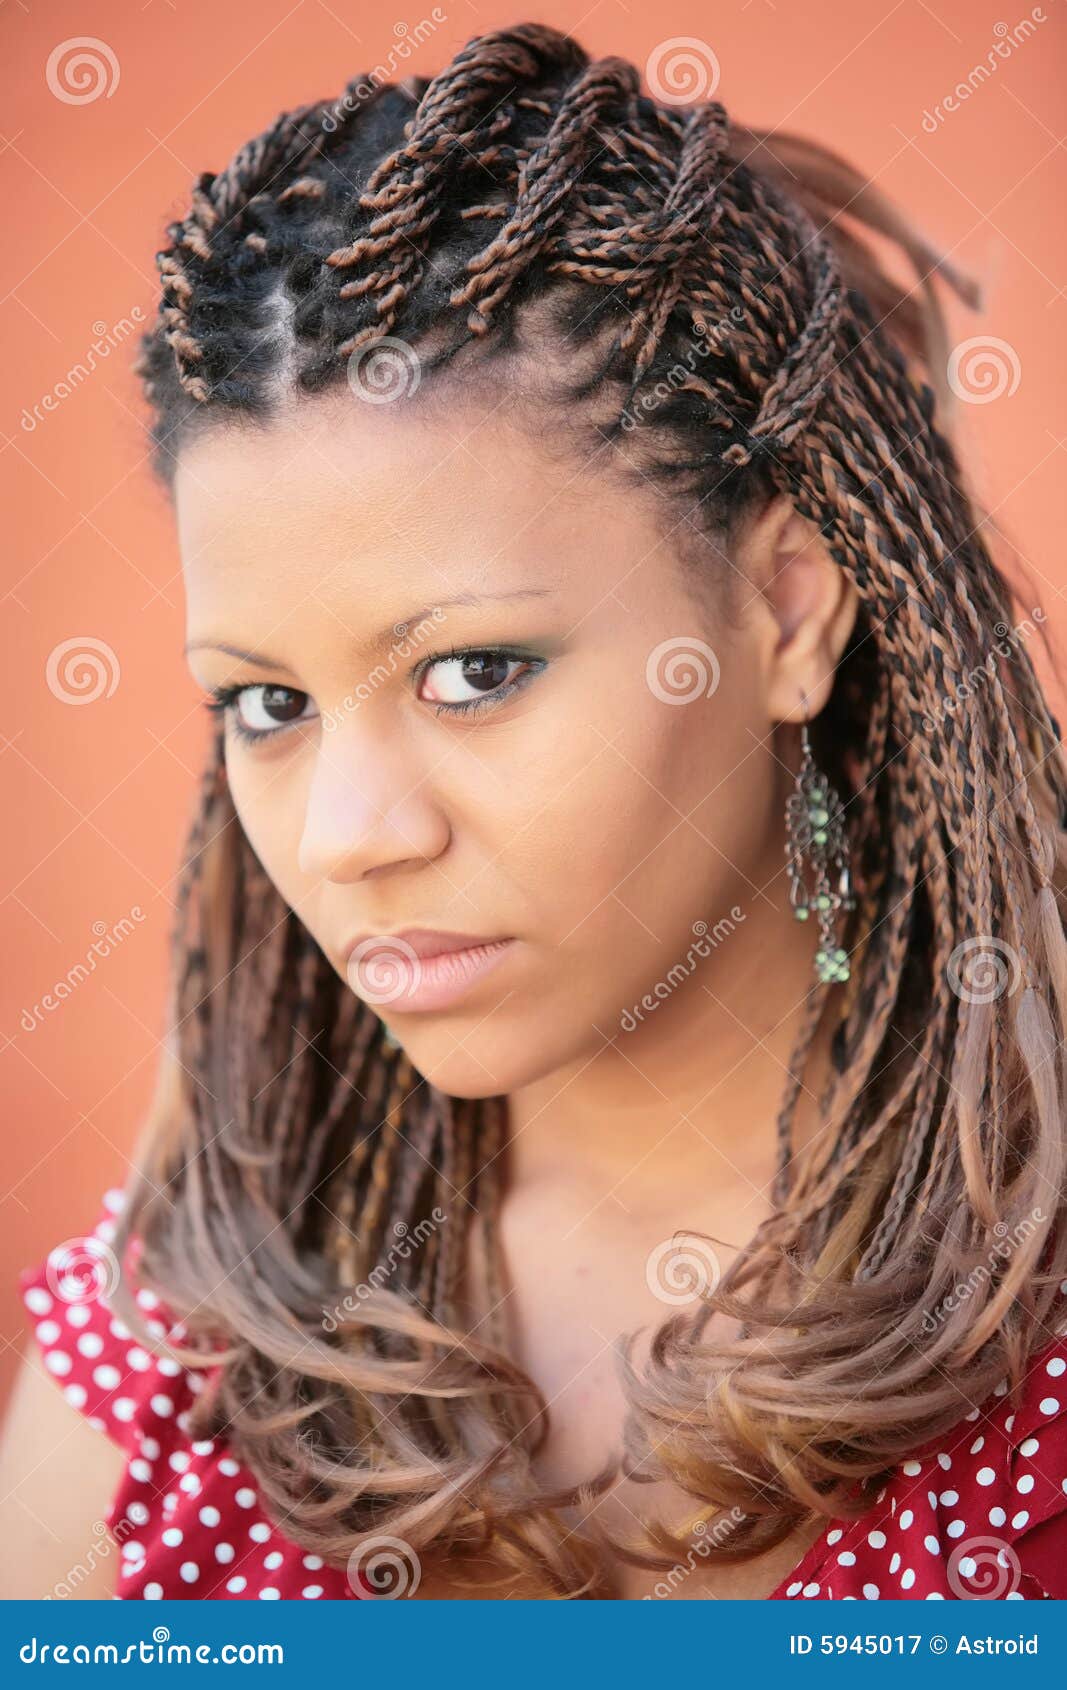 Girl With Exotic Hairstyle Royalty Free Stock Photography - Image ...